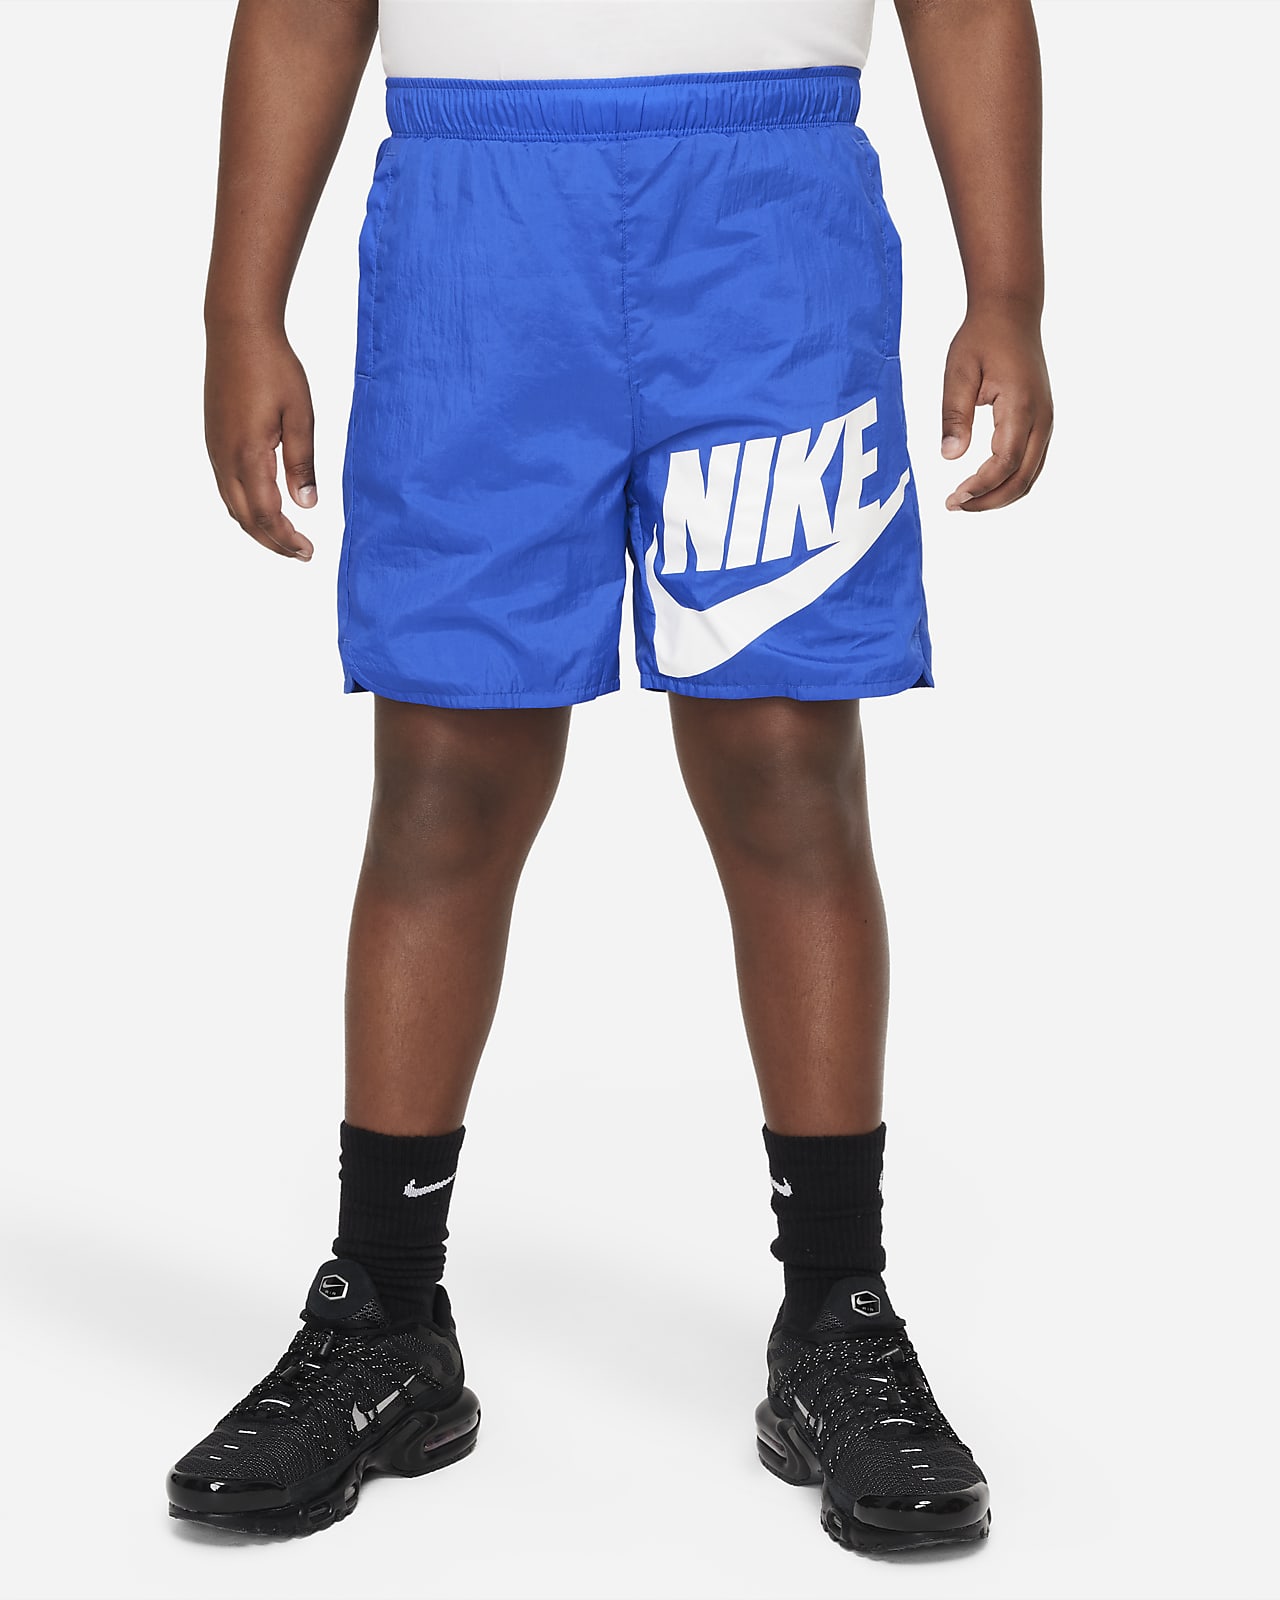 https://static.nike.com/a/images/t_PDP_1280_v1/f_auto,q_auto:eco/f615de41-bbb0-43ae-a45e-f392fdb0f2fa/sportswear-older-woven-shorts-W89s6M.png